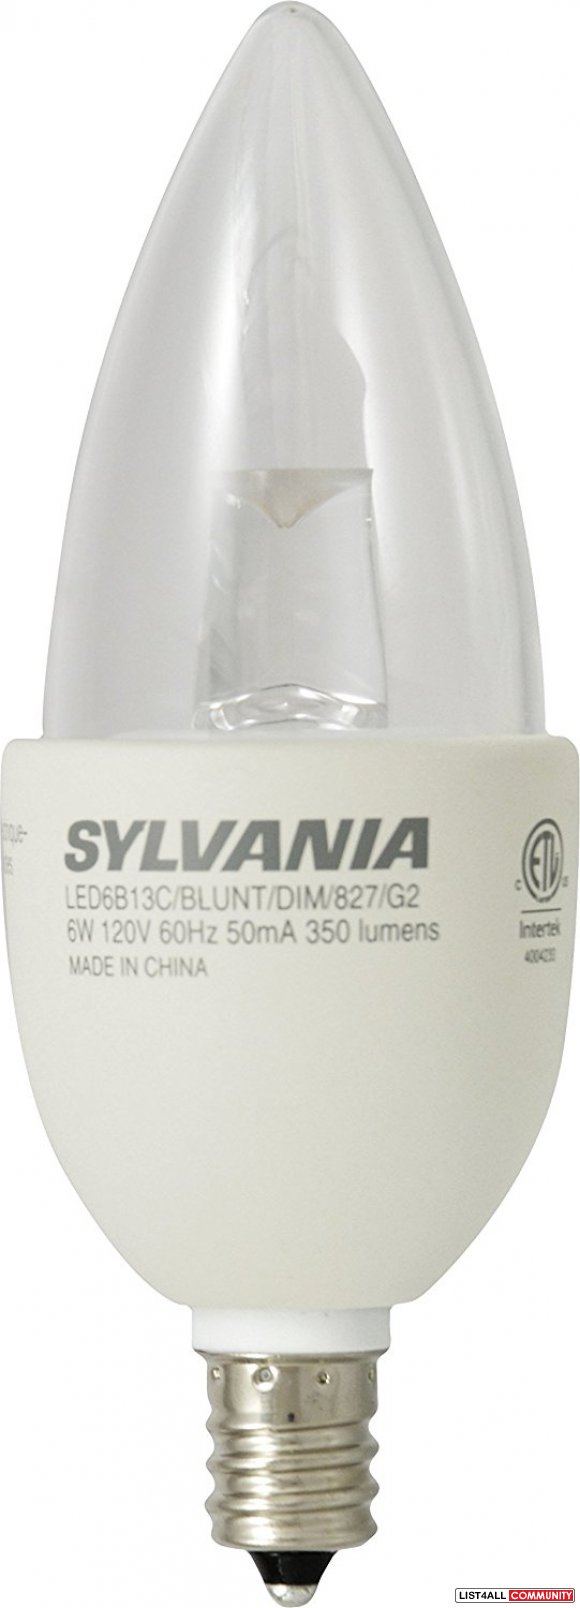 SYLVANIA 40W Equivalent Dimmable Candelabra LED Bulb - Soft White